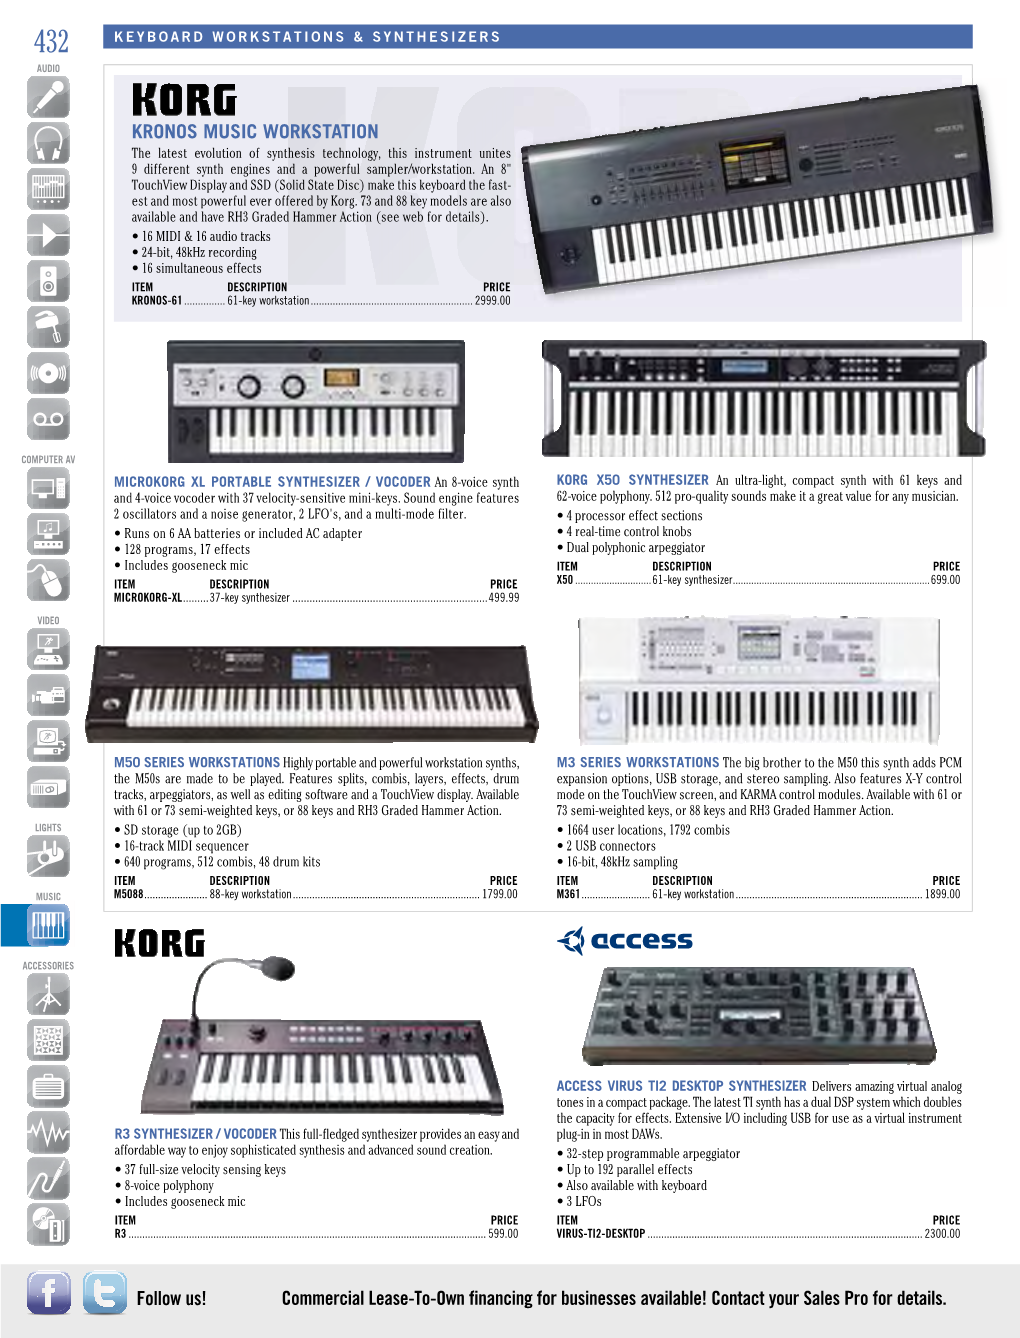 KRONOS MUSIC WORKSTATION Commercial Lease-To-Own